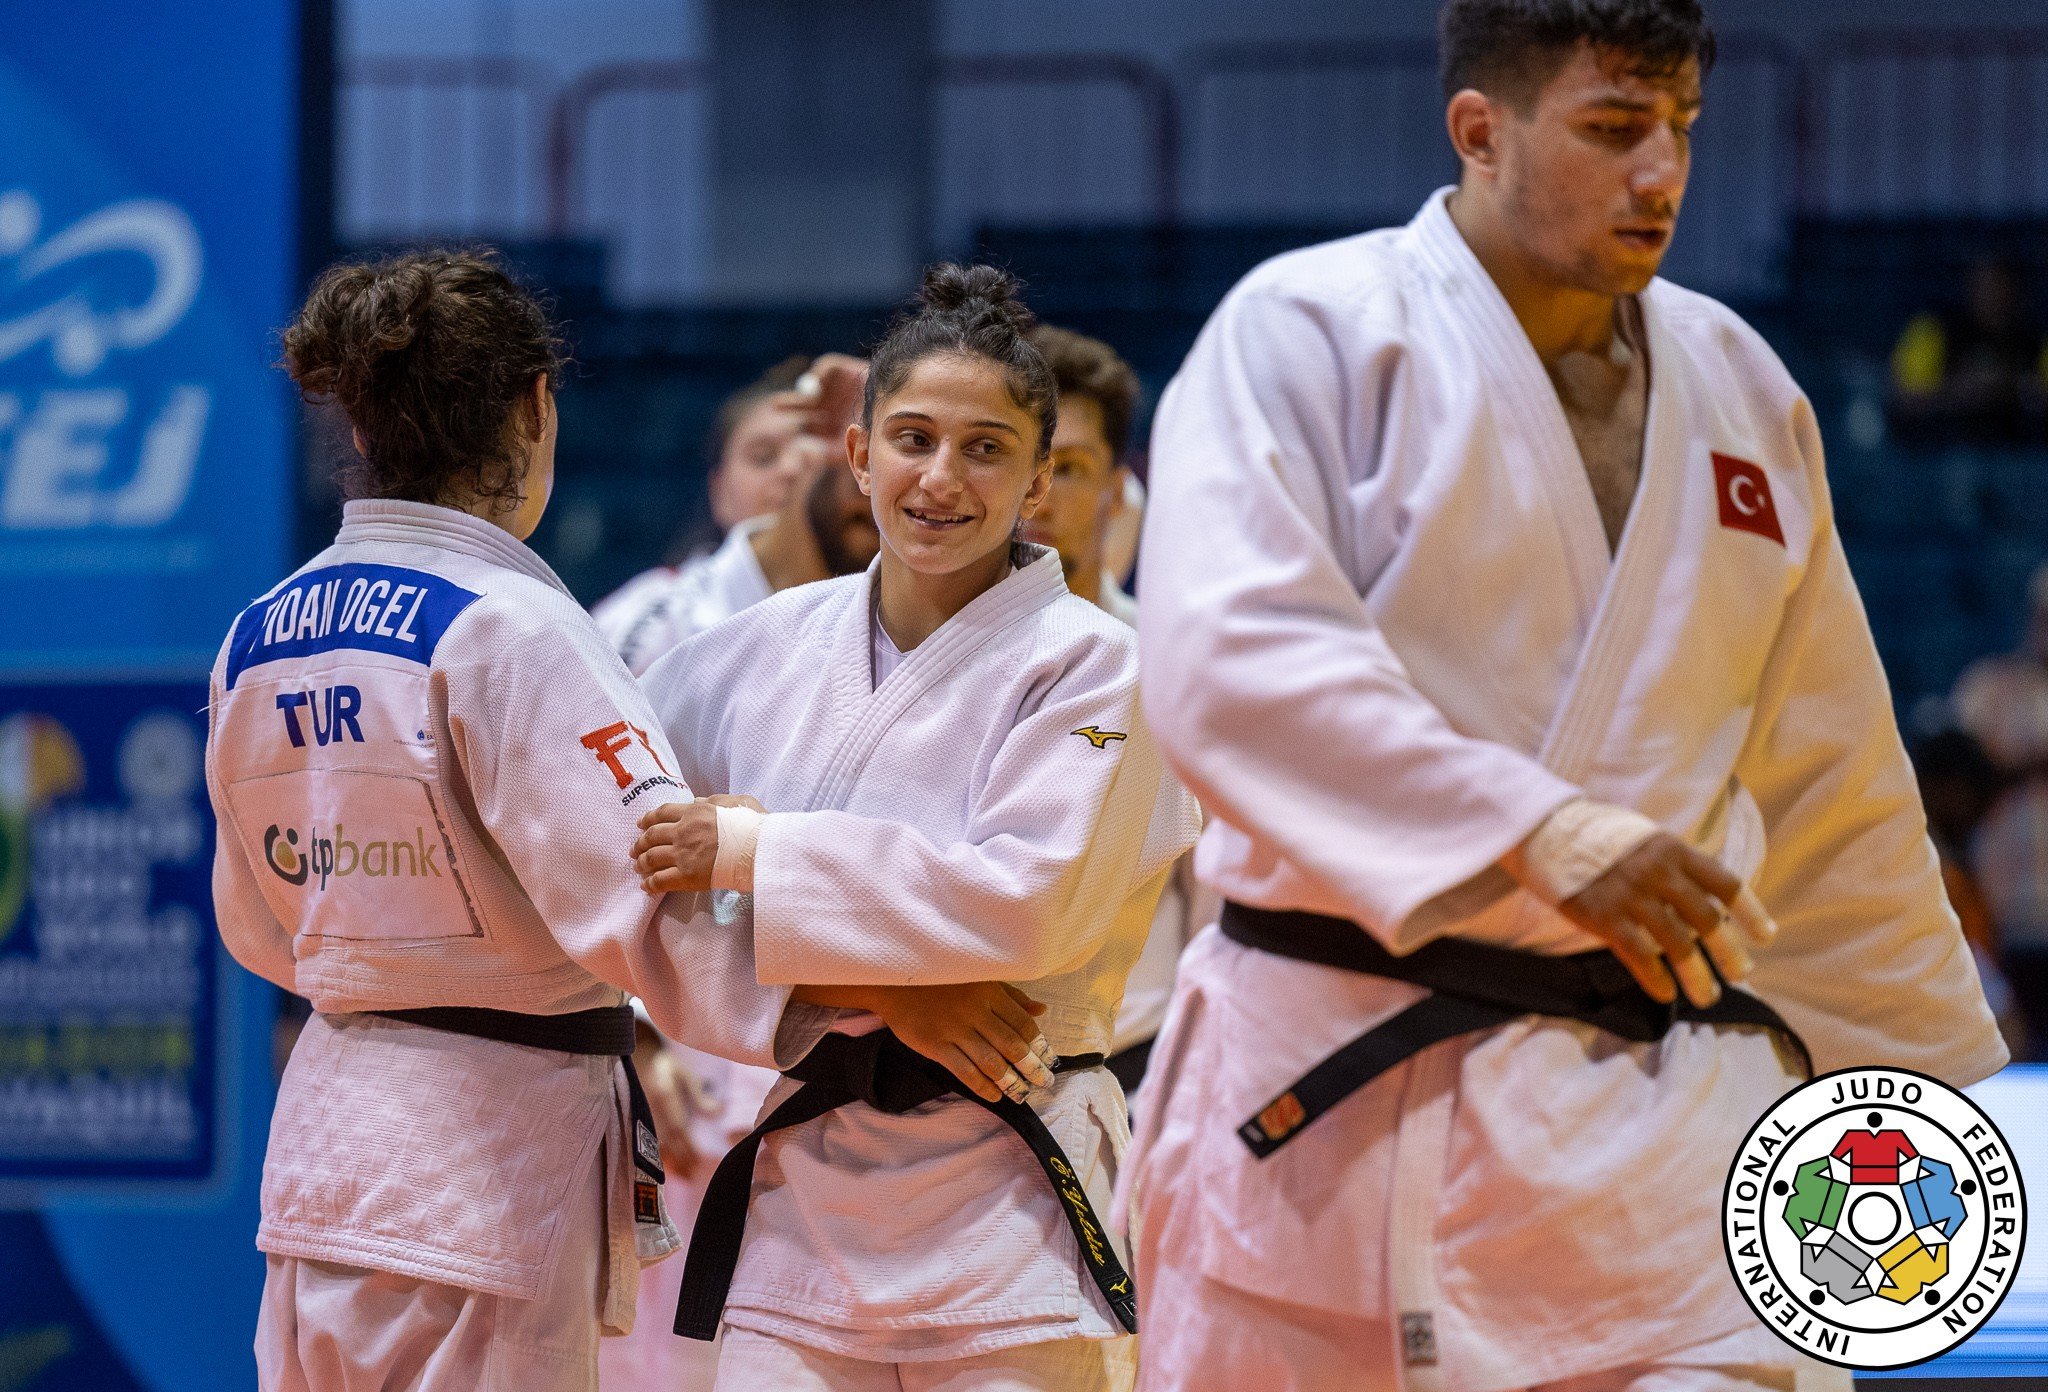 TÜRKIYE, FRANCE AND GERMANY TAKE HOME JUNIOR WORLD MIXED TEAM MEDALS